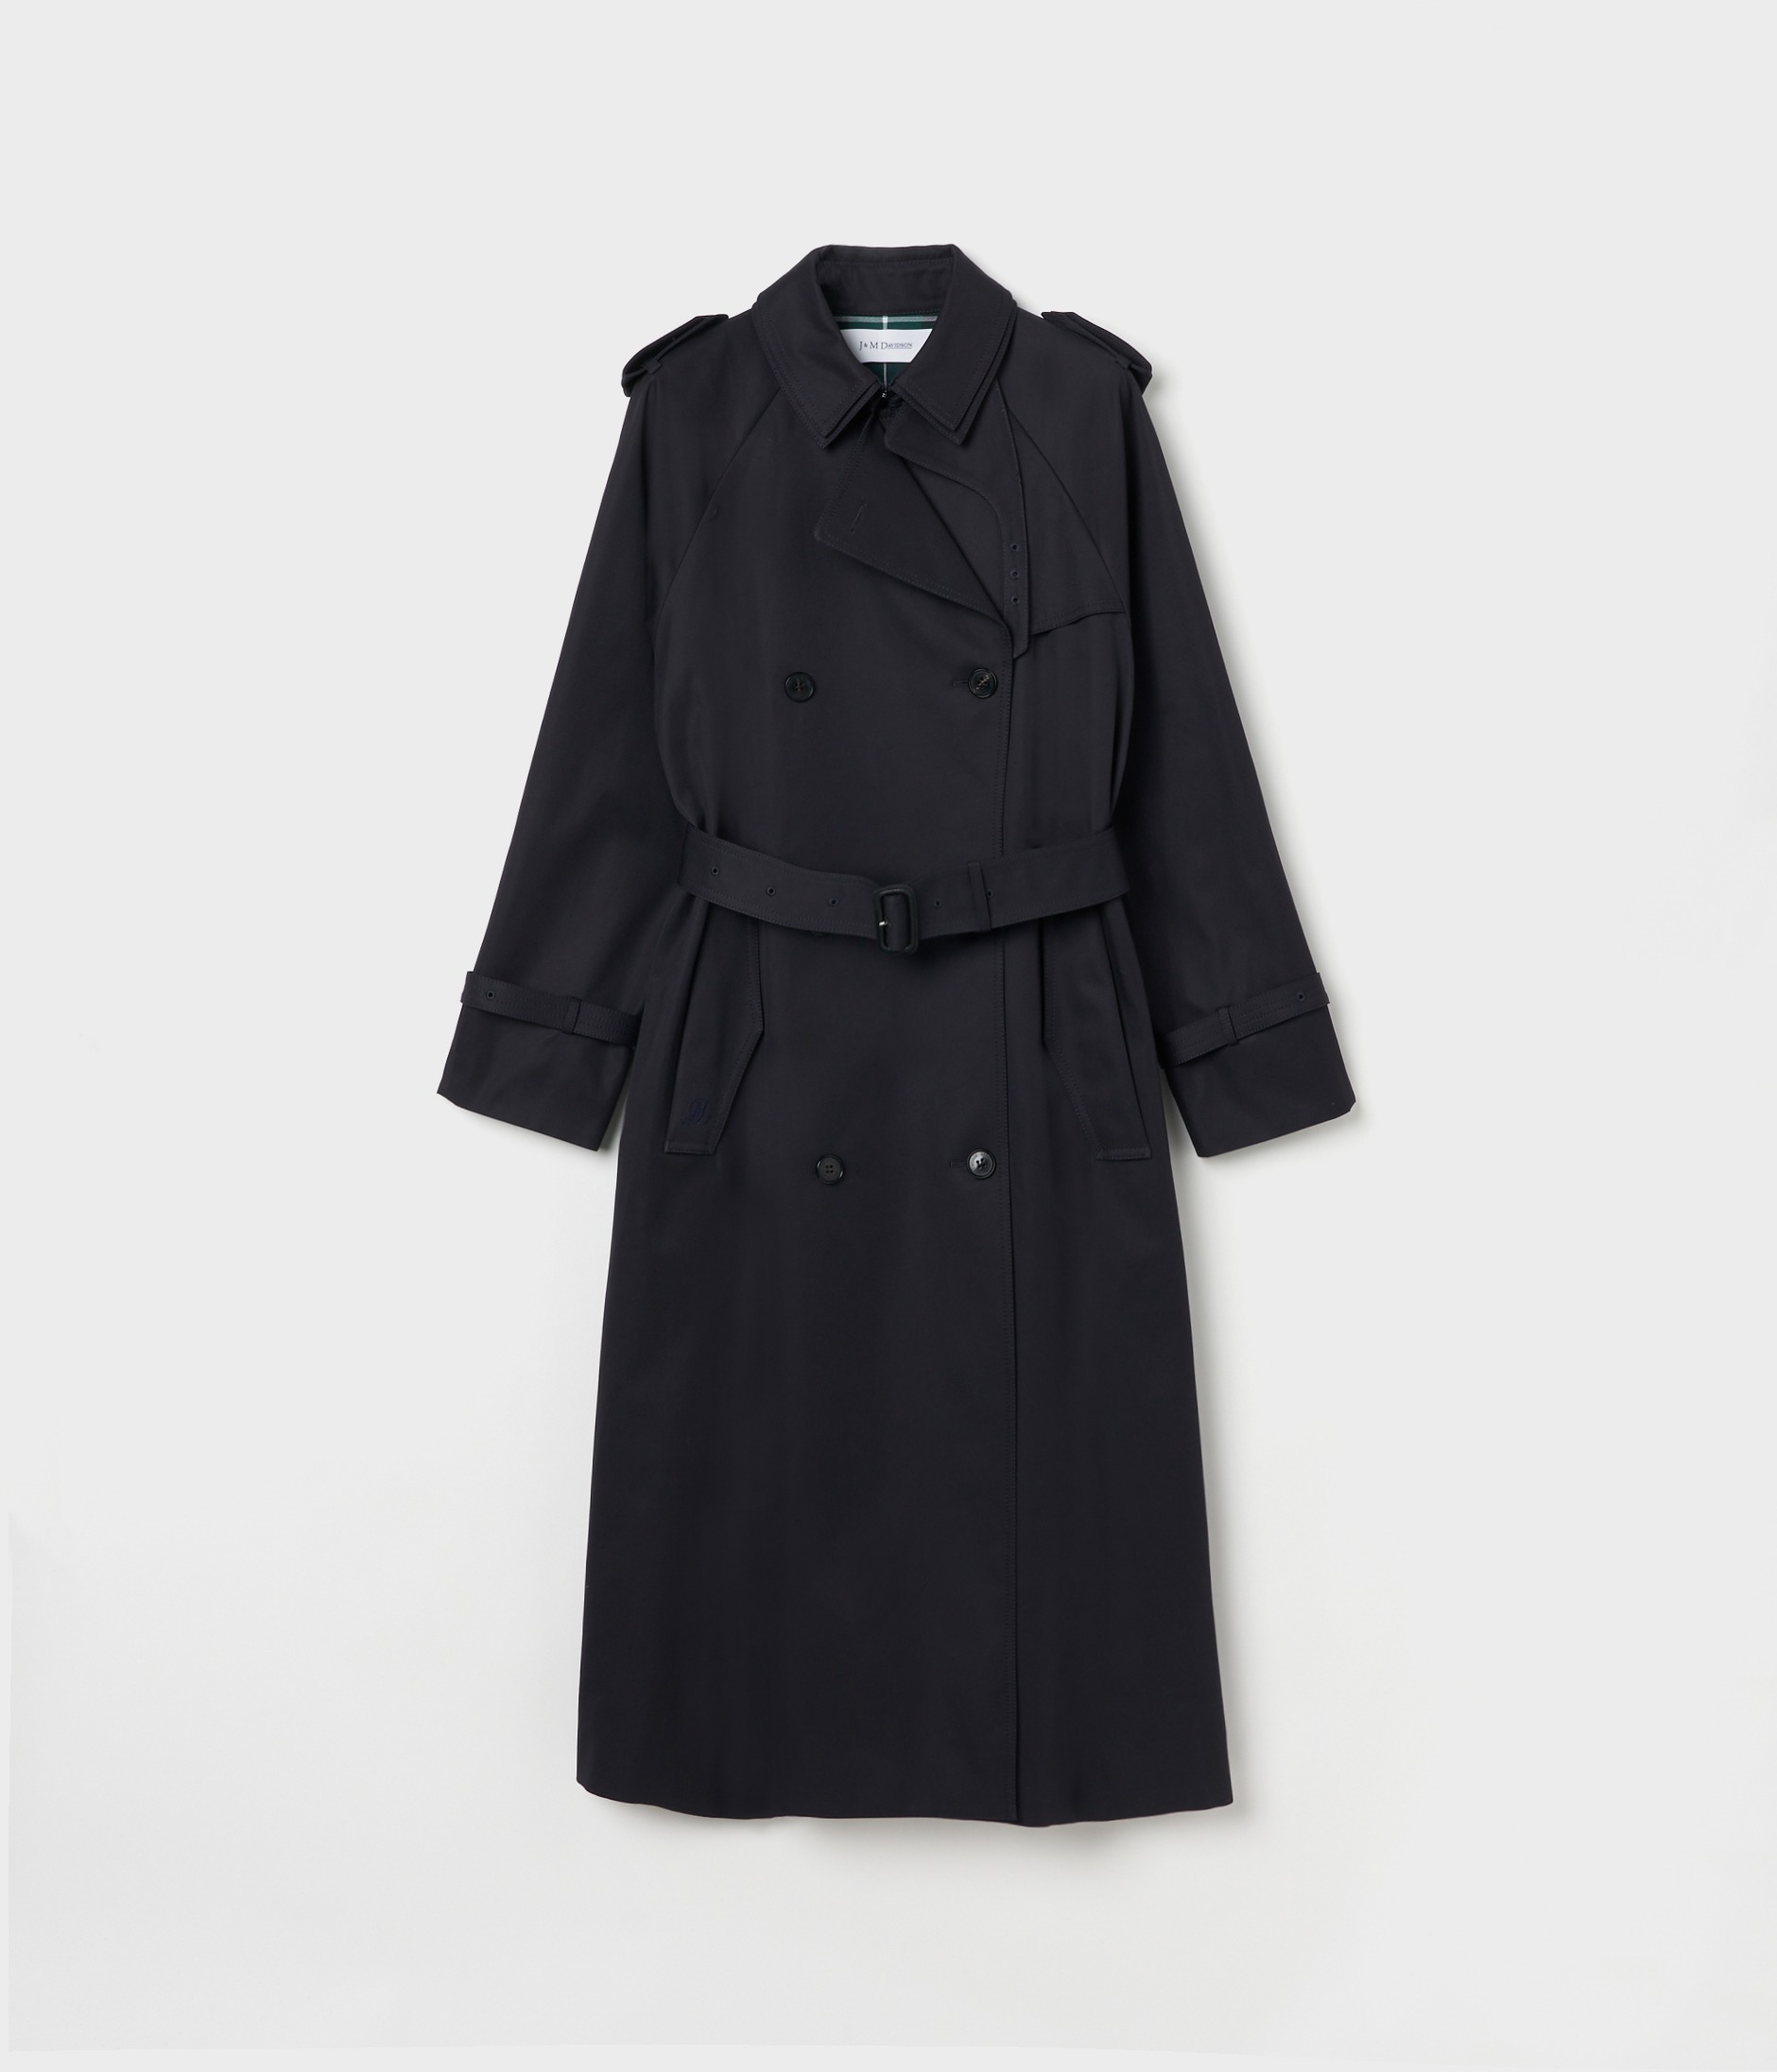 DOUBLE COLLAR TRENCH